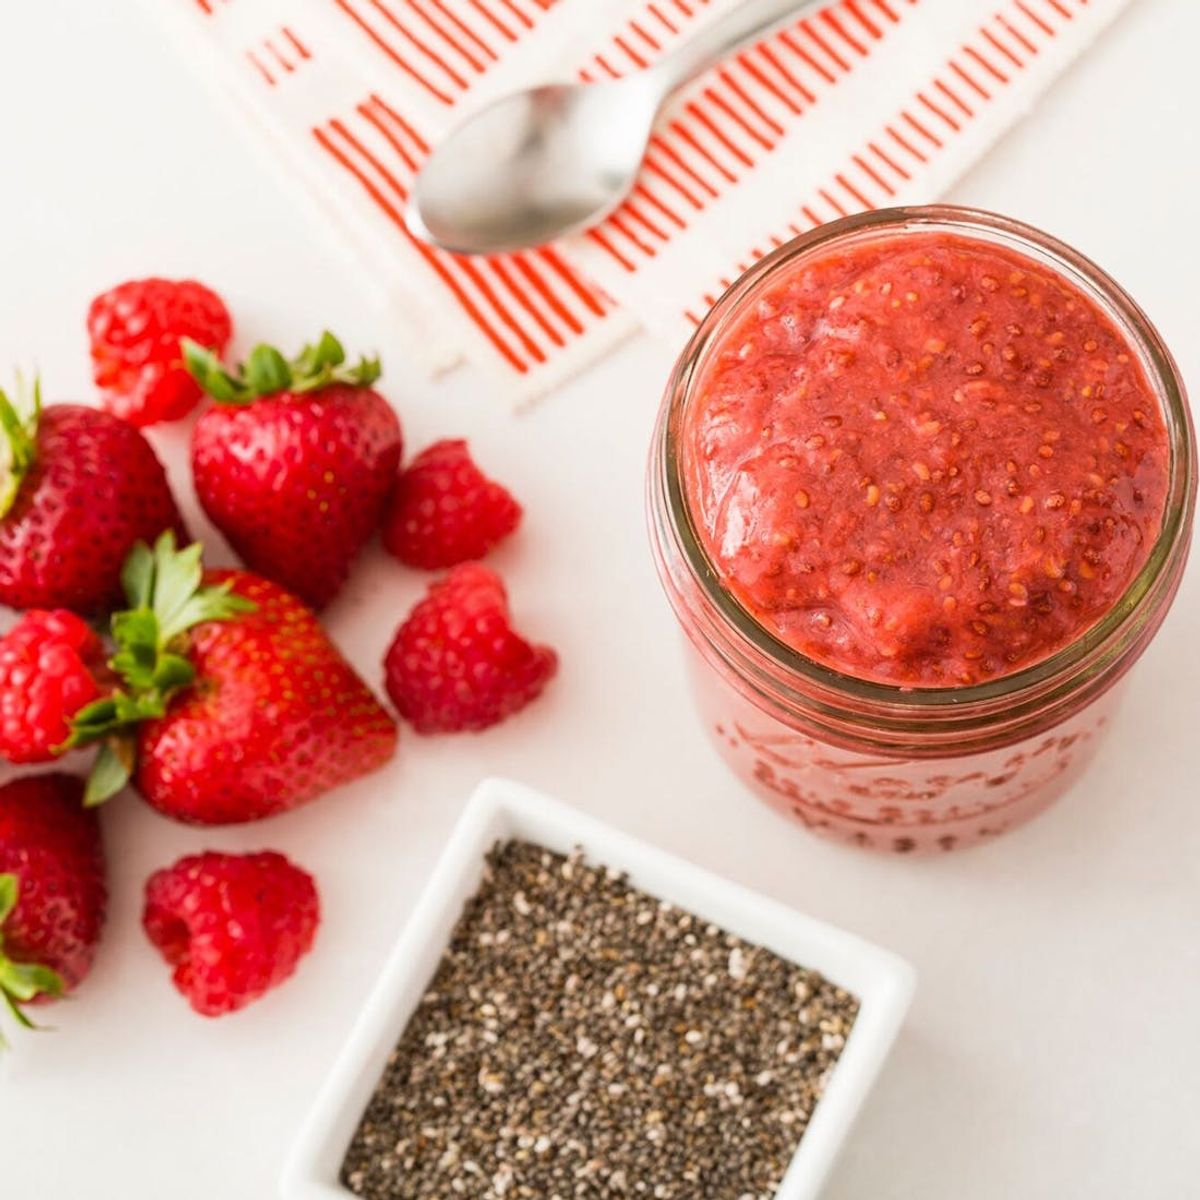 Healthy Brunch Hack: How to Make Chia Berry Jam